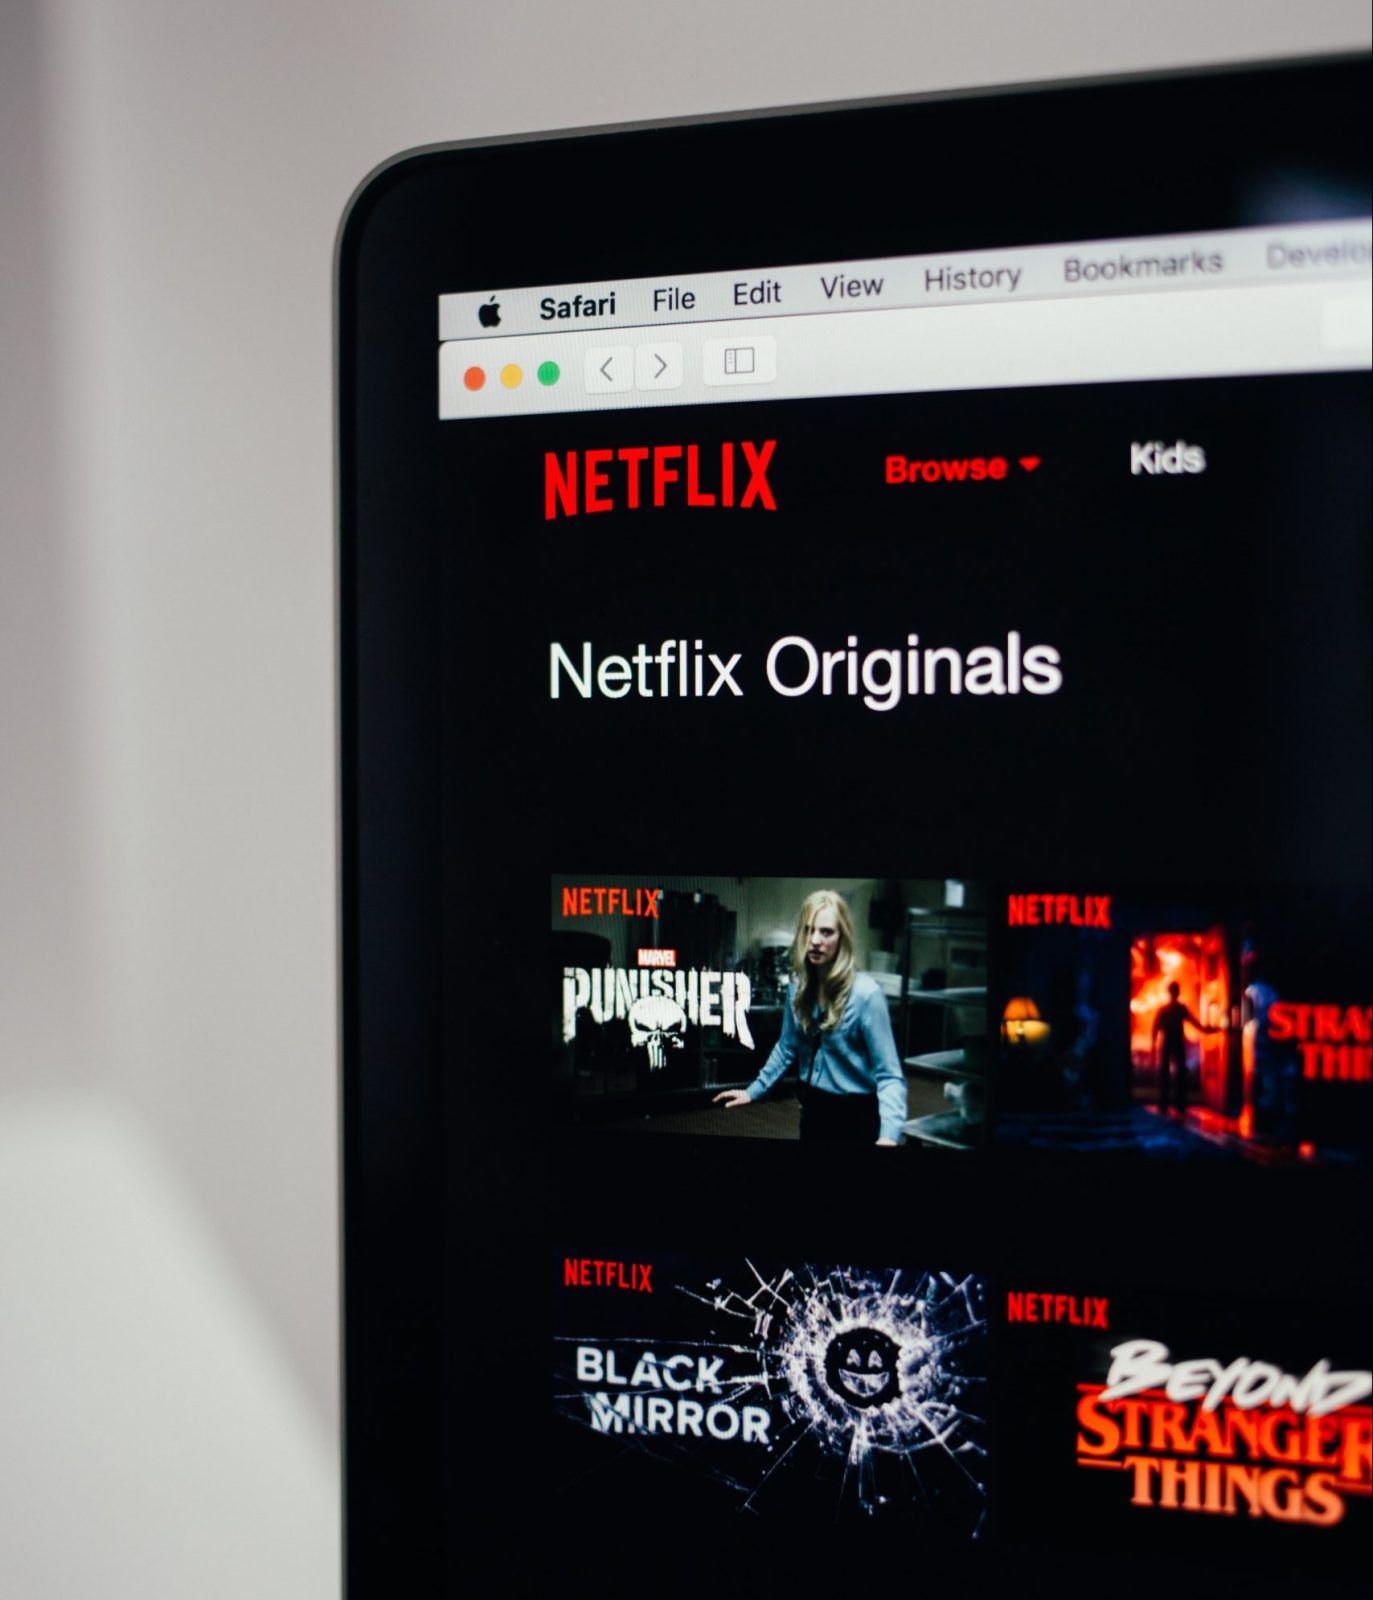 All Netflix subscription prices in the UK are going up, The Manc